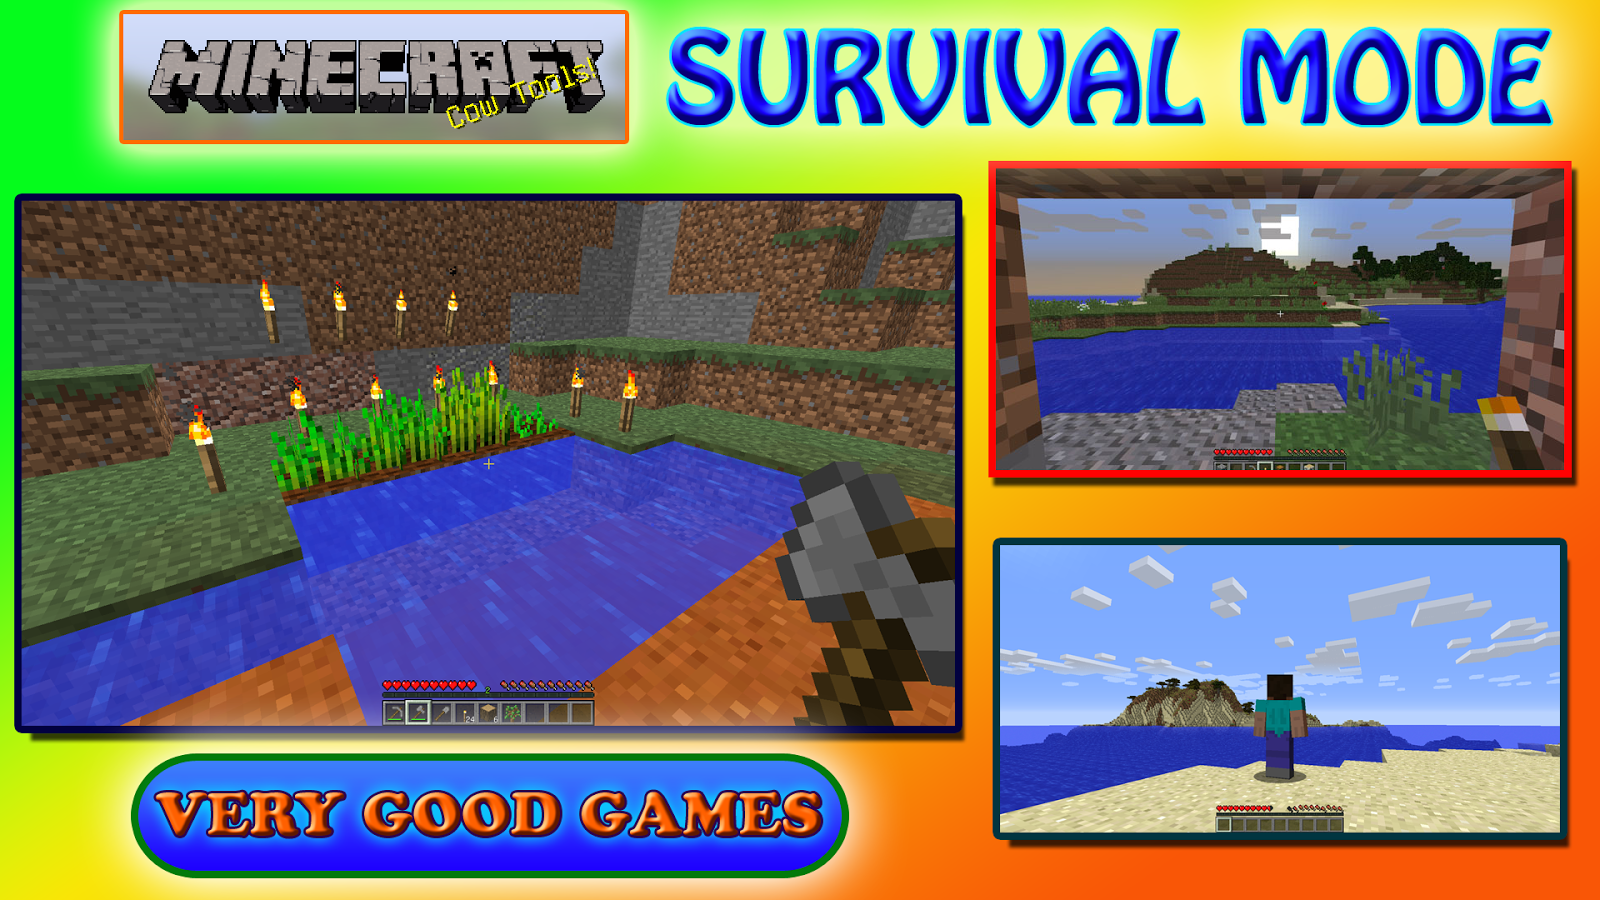 A Minecraft tutorial on Very Good Games about the Survival mode of the game